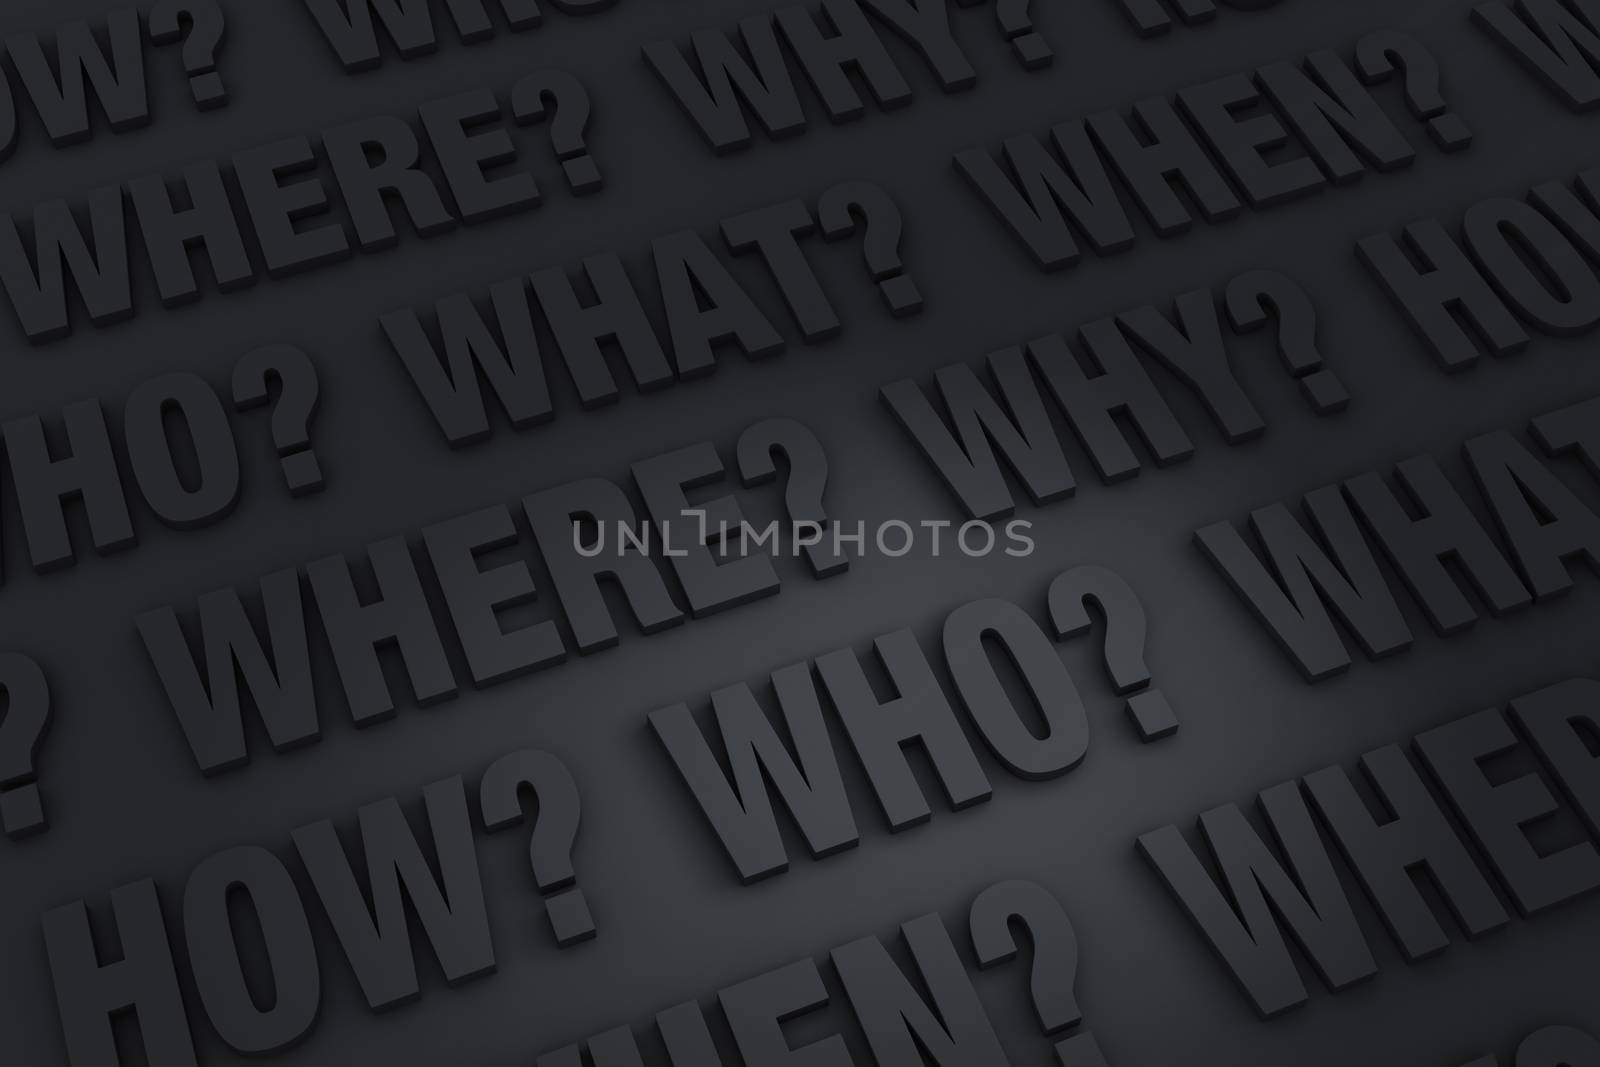 A dark background filled with the "WHO?", "WHAT?", "WHERE?", "WHEN?", "HOW?", and "WHY?".
